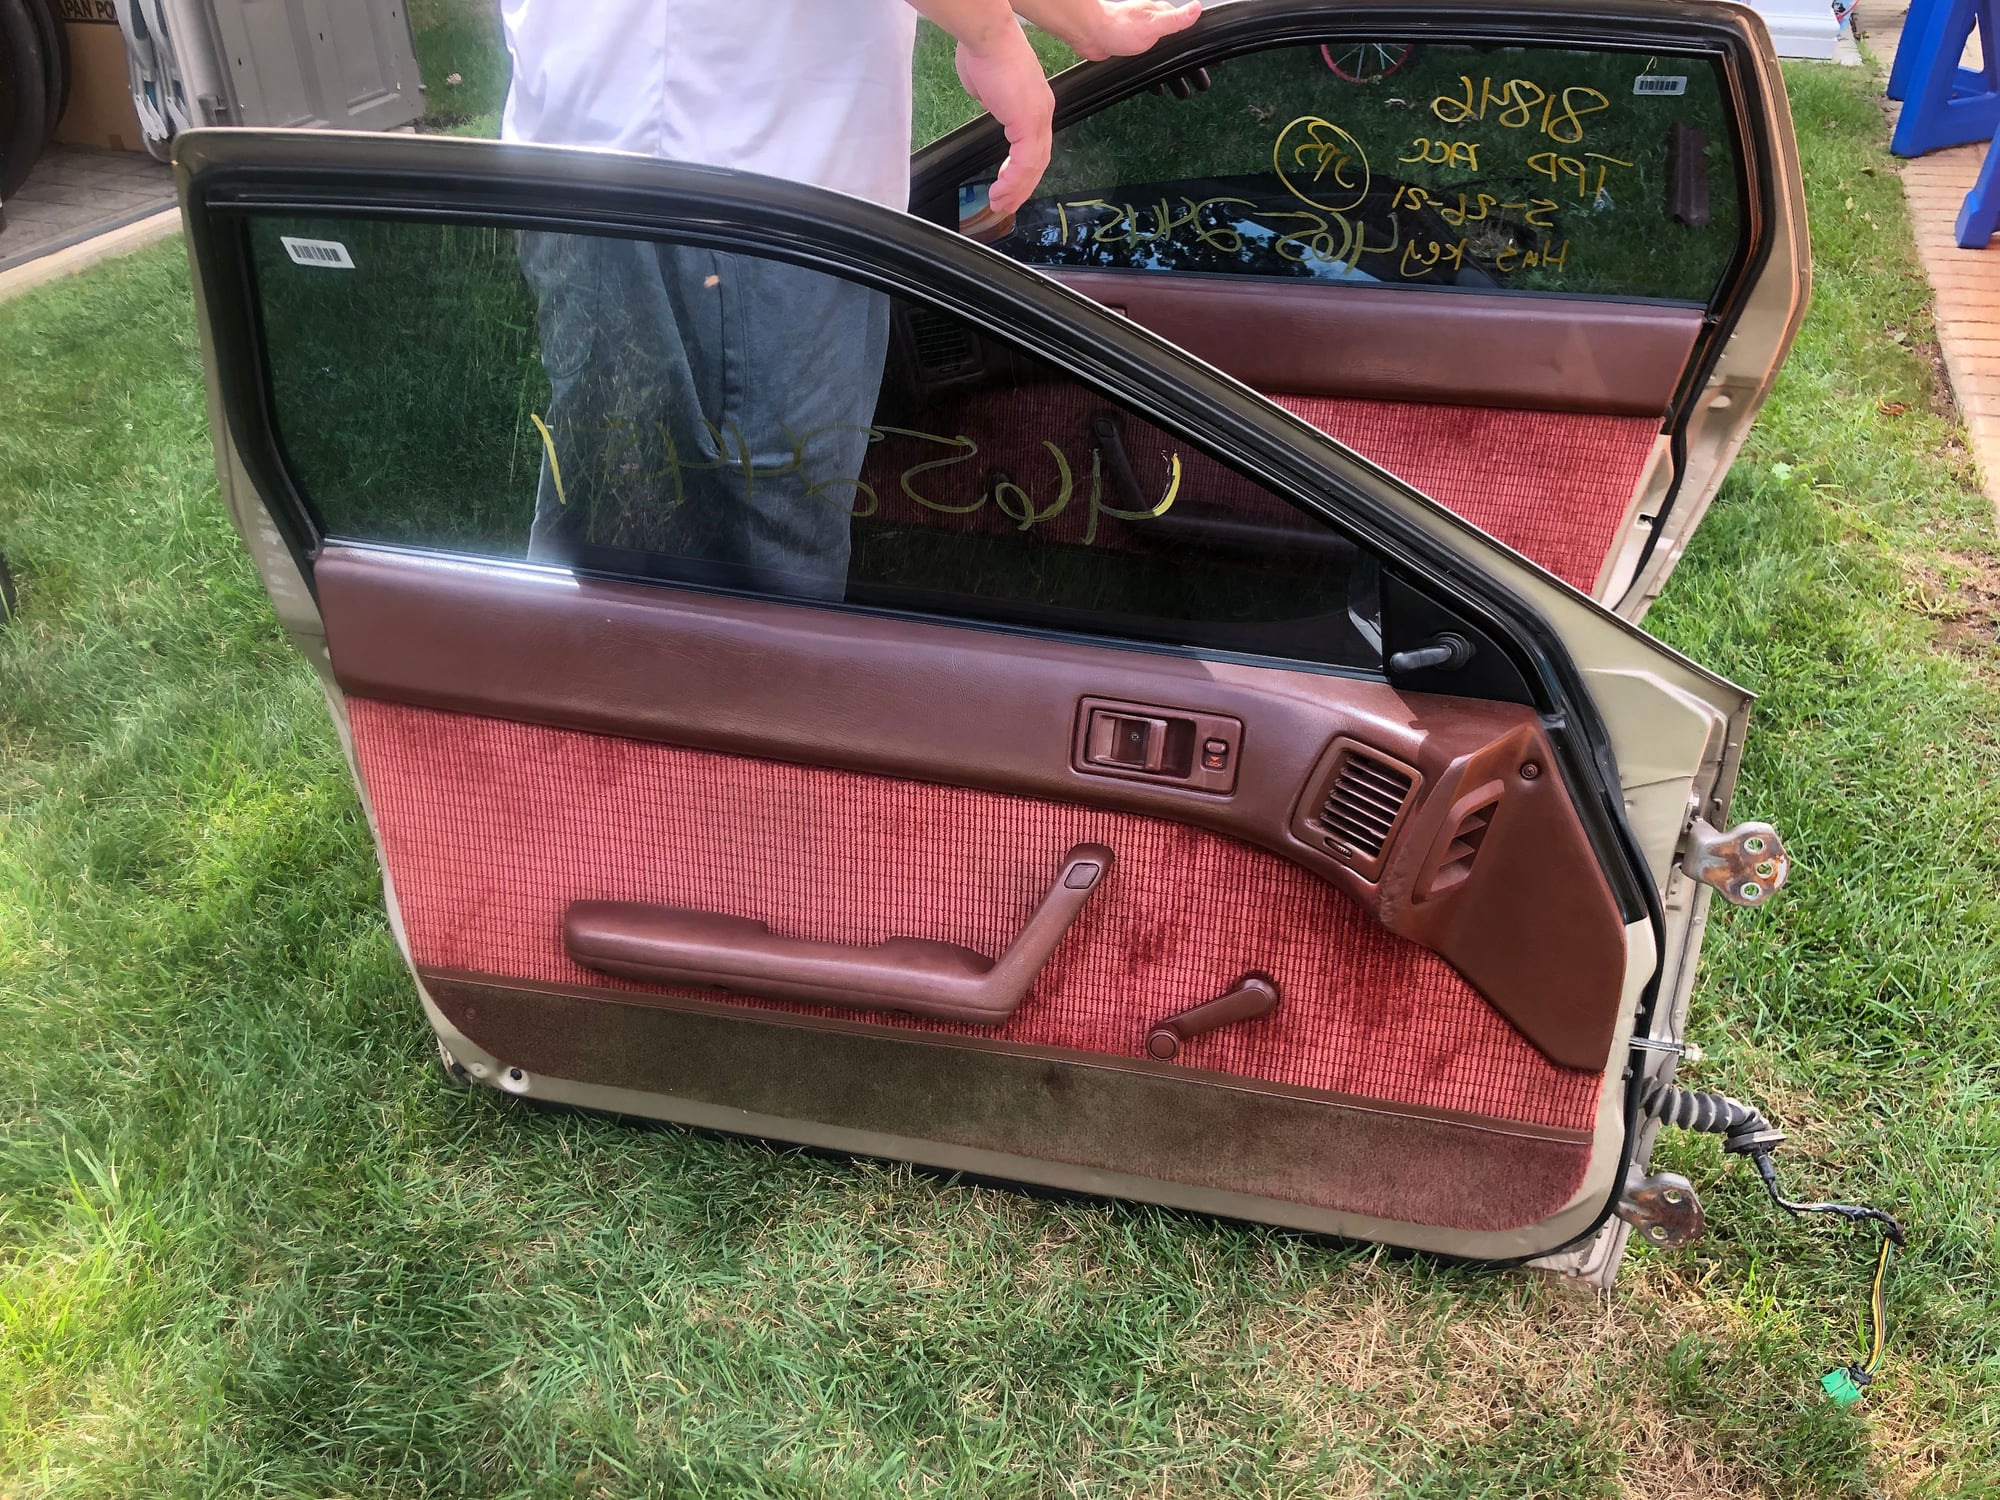 Interior/Upholstery - Misc. Interior parts & hatch - Used - 1987 to 1991 Mazda RX-7 - Oceanside, NY 11572, United States